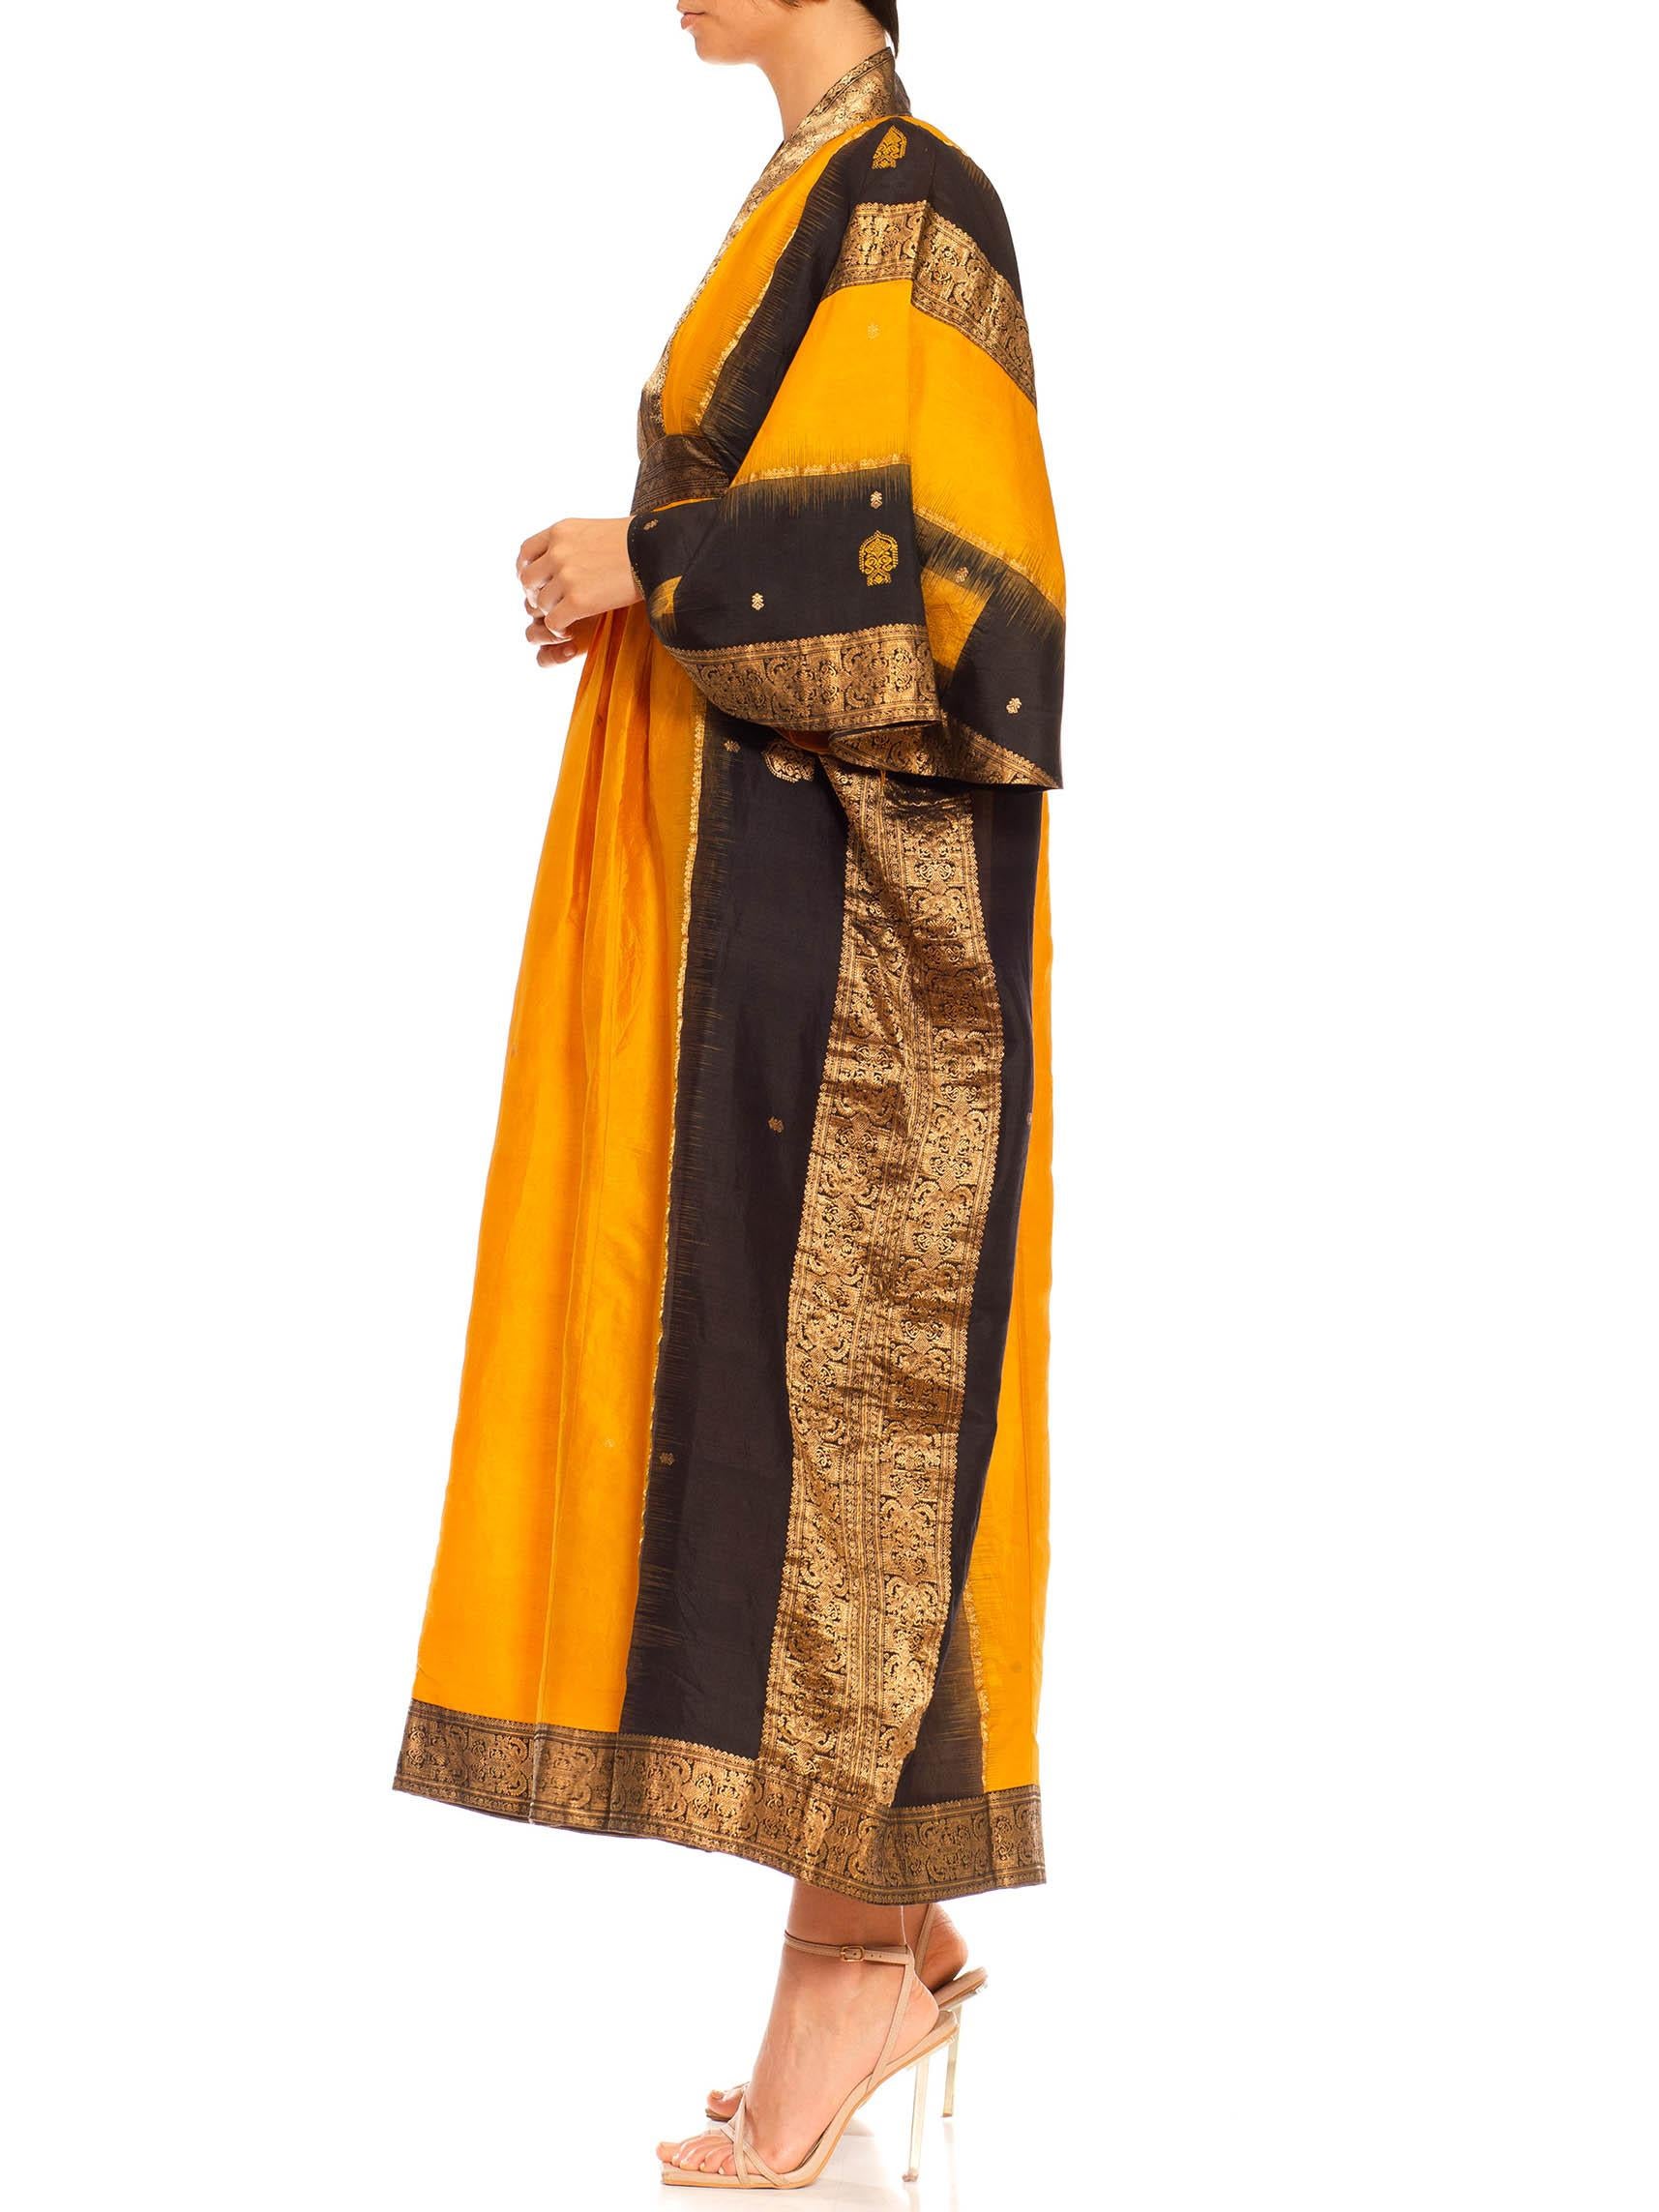 Morphew Collection Saffron, Black & Gold Silk Kaftan Made From Vintage Saris
MORPHEW COLLECTION is made entirely by hand in our NYC Ateliér of rare antique materials sourced from around the globe. Our sustainable vintage materials represent over a